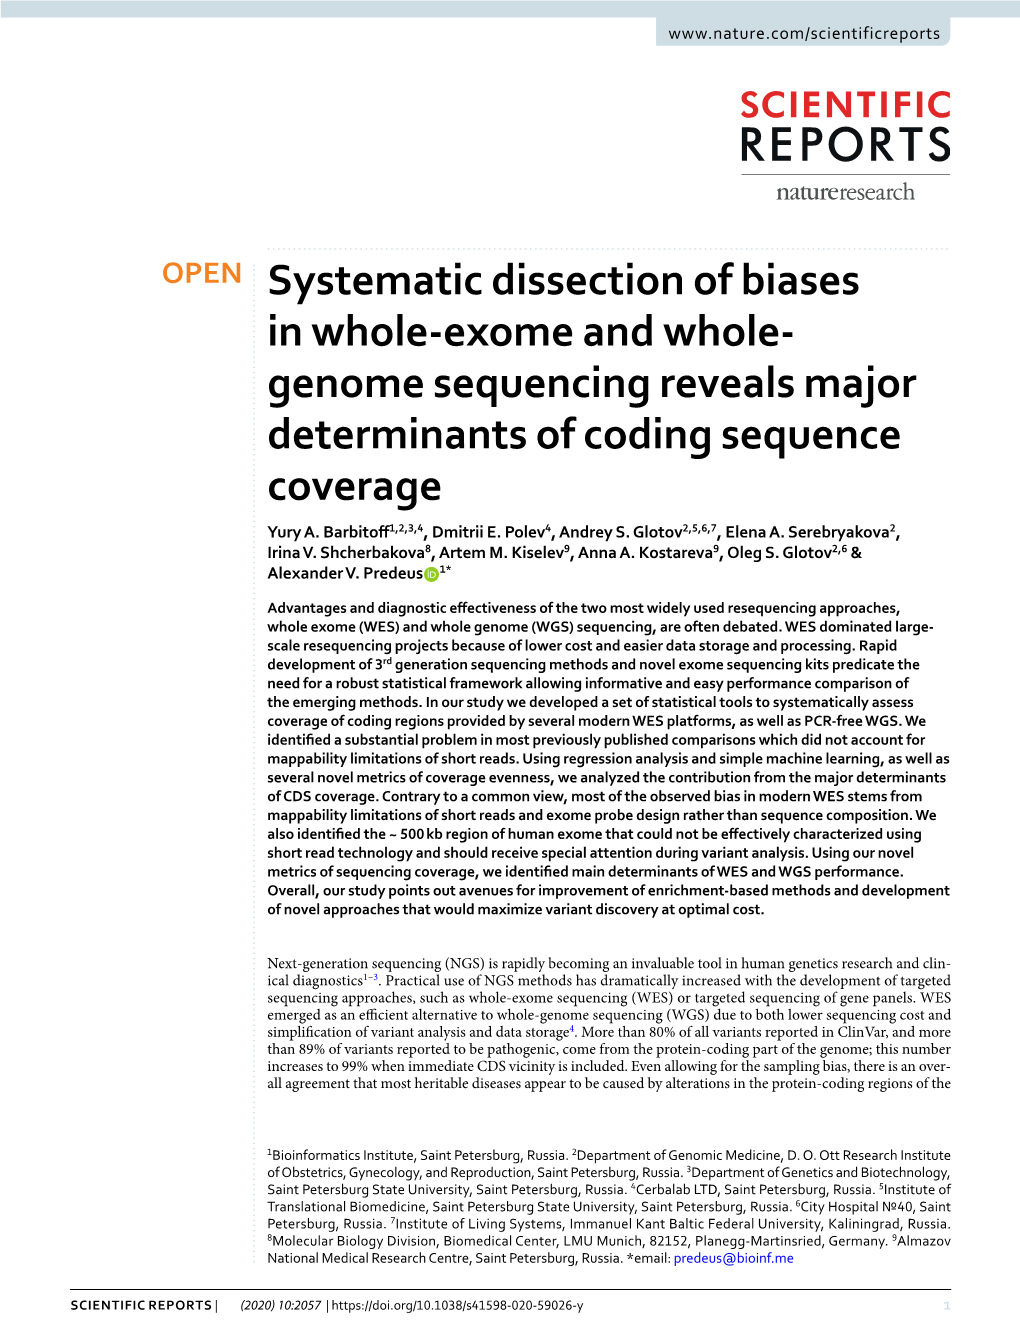 Systematic Dissection of Biases in Whole-Exome and Whole-Genome Sequencing Reveals Major Determinants of Coding Sequence Coverag